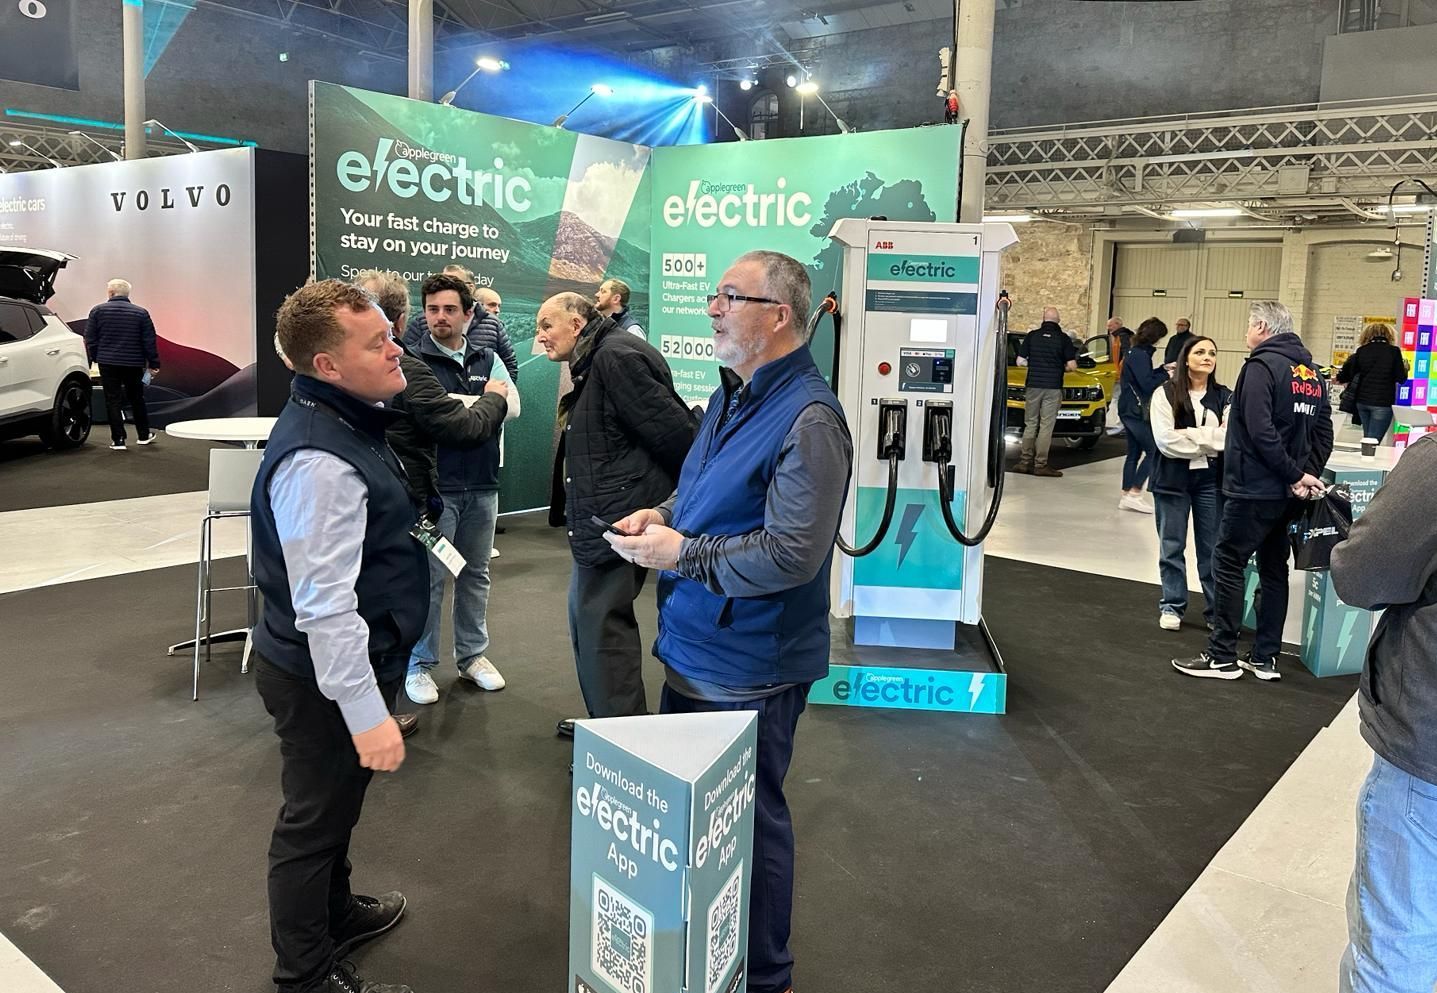 Applegreen Electric stand at Nevo car show